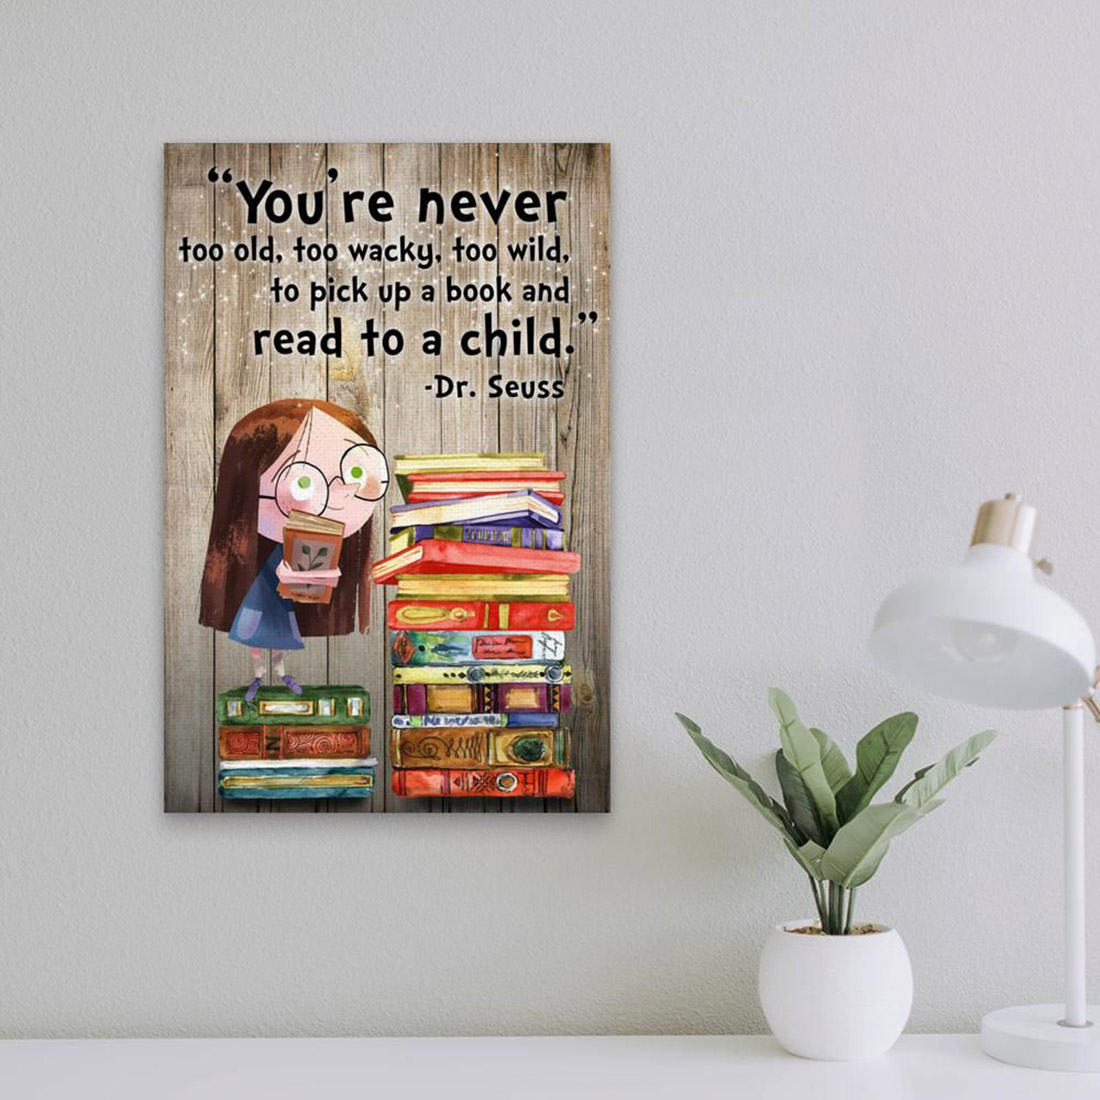 You're never too old too wacky too wild to pick up a book and read to a child poster